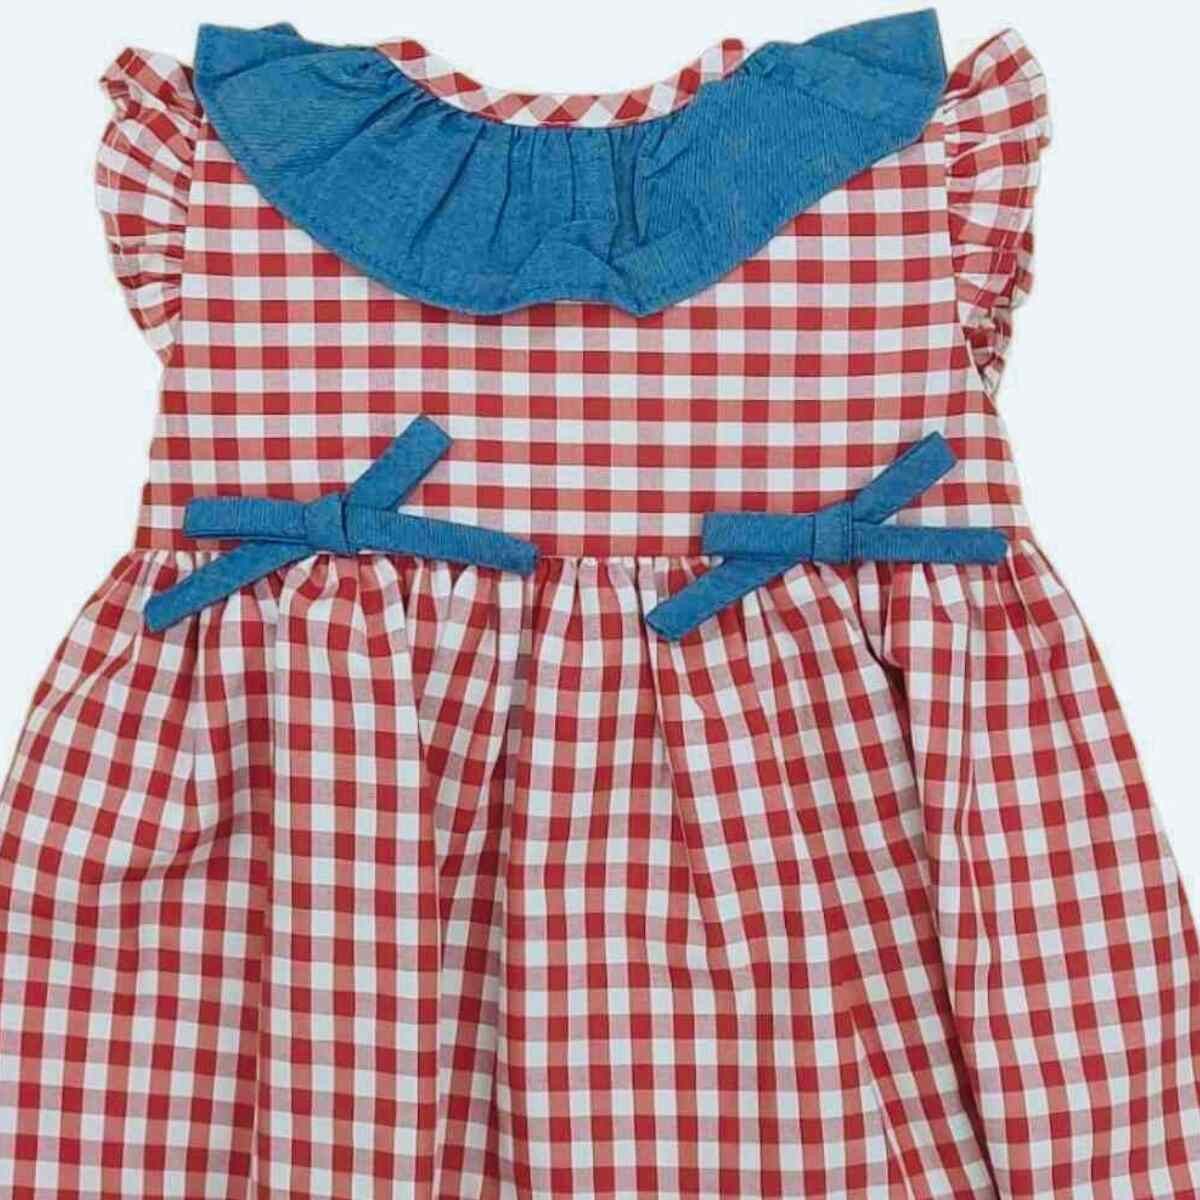 RED CHECK DRESS WITH BLUE BOWS BABYFERR - 2